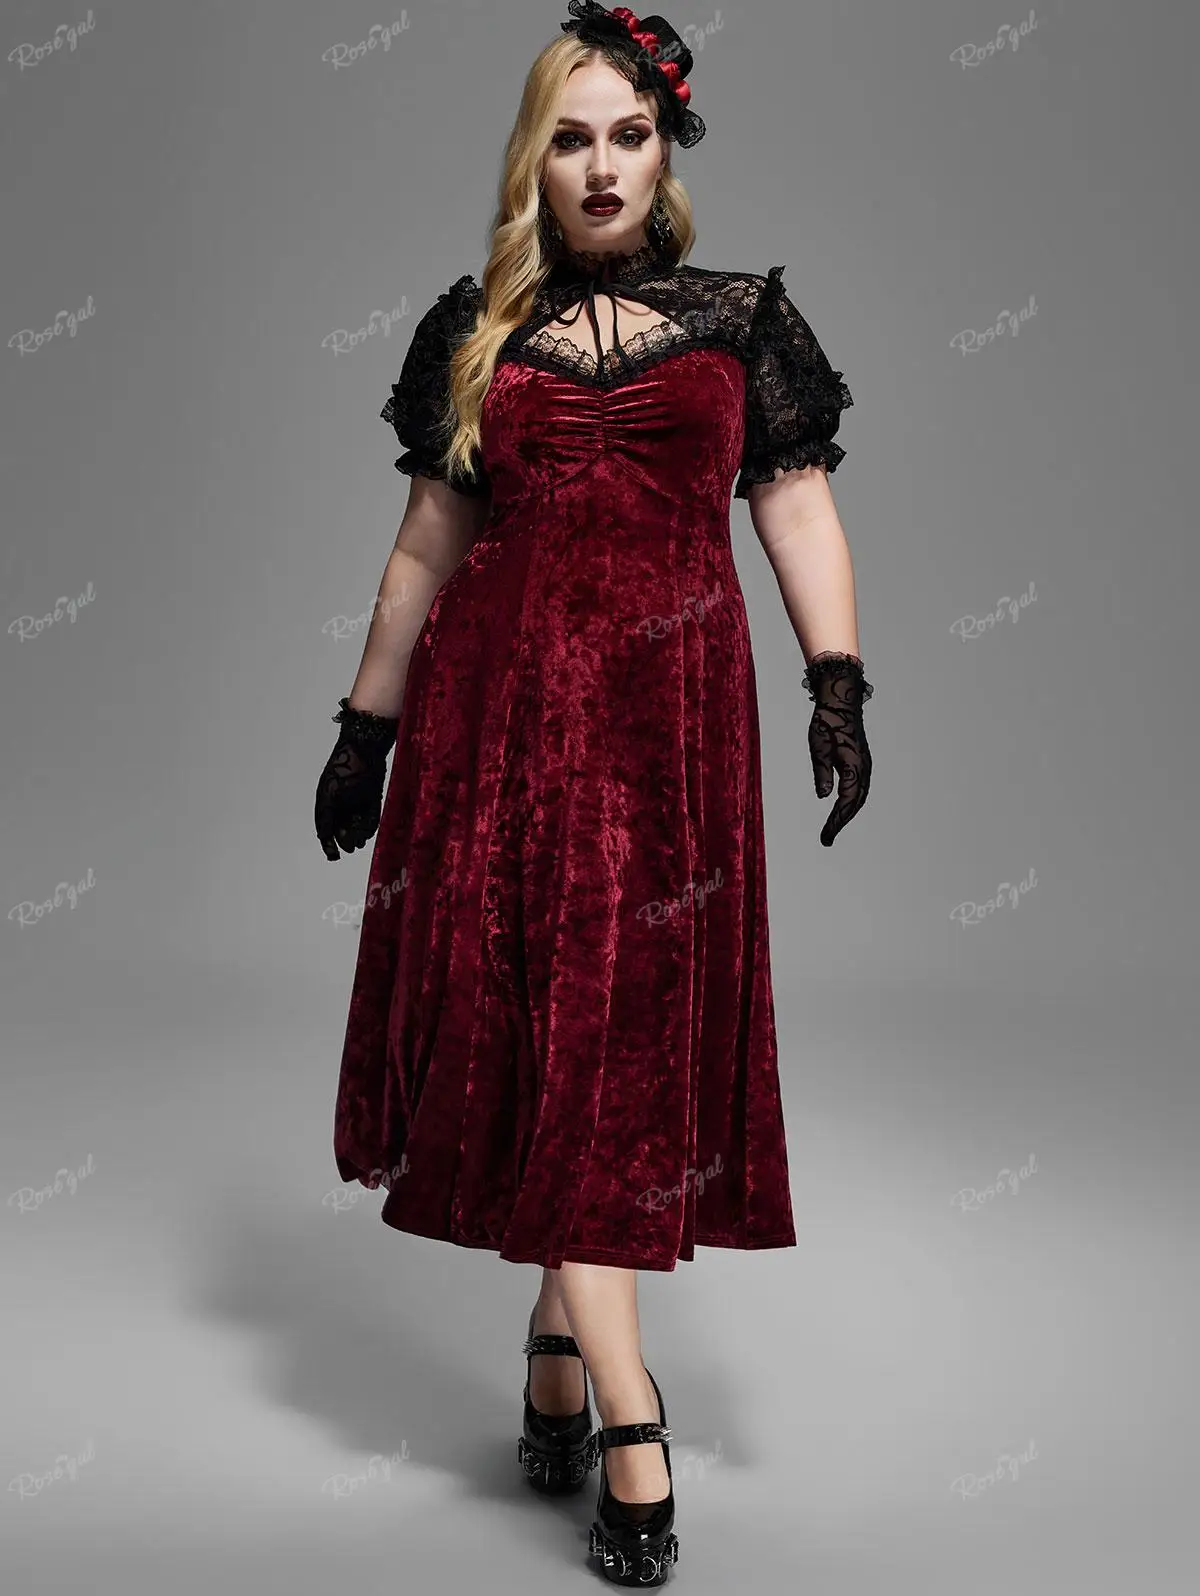 

ROSEGAL Plus Size Elegant Women's Dresses Gothic Lace Panel Cut Out Ruched Cinched Velvet Party Dress Puff Sleeves Vestidos